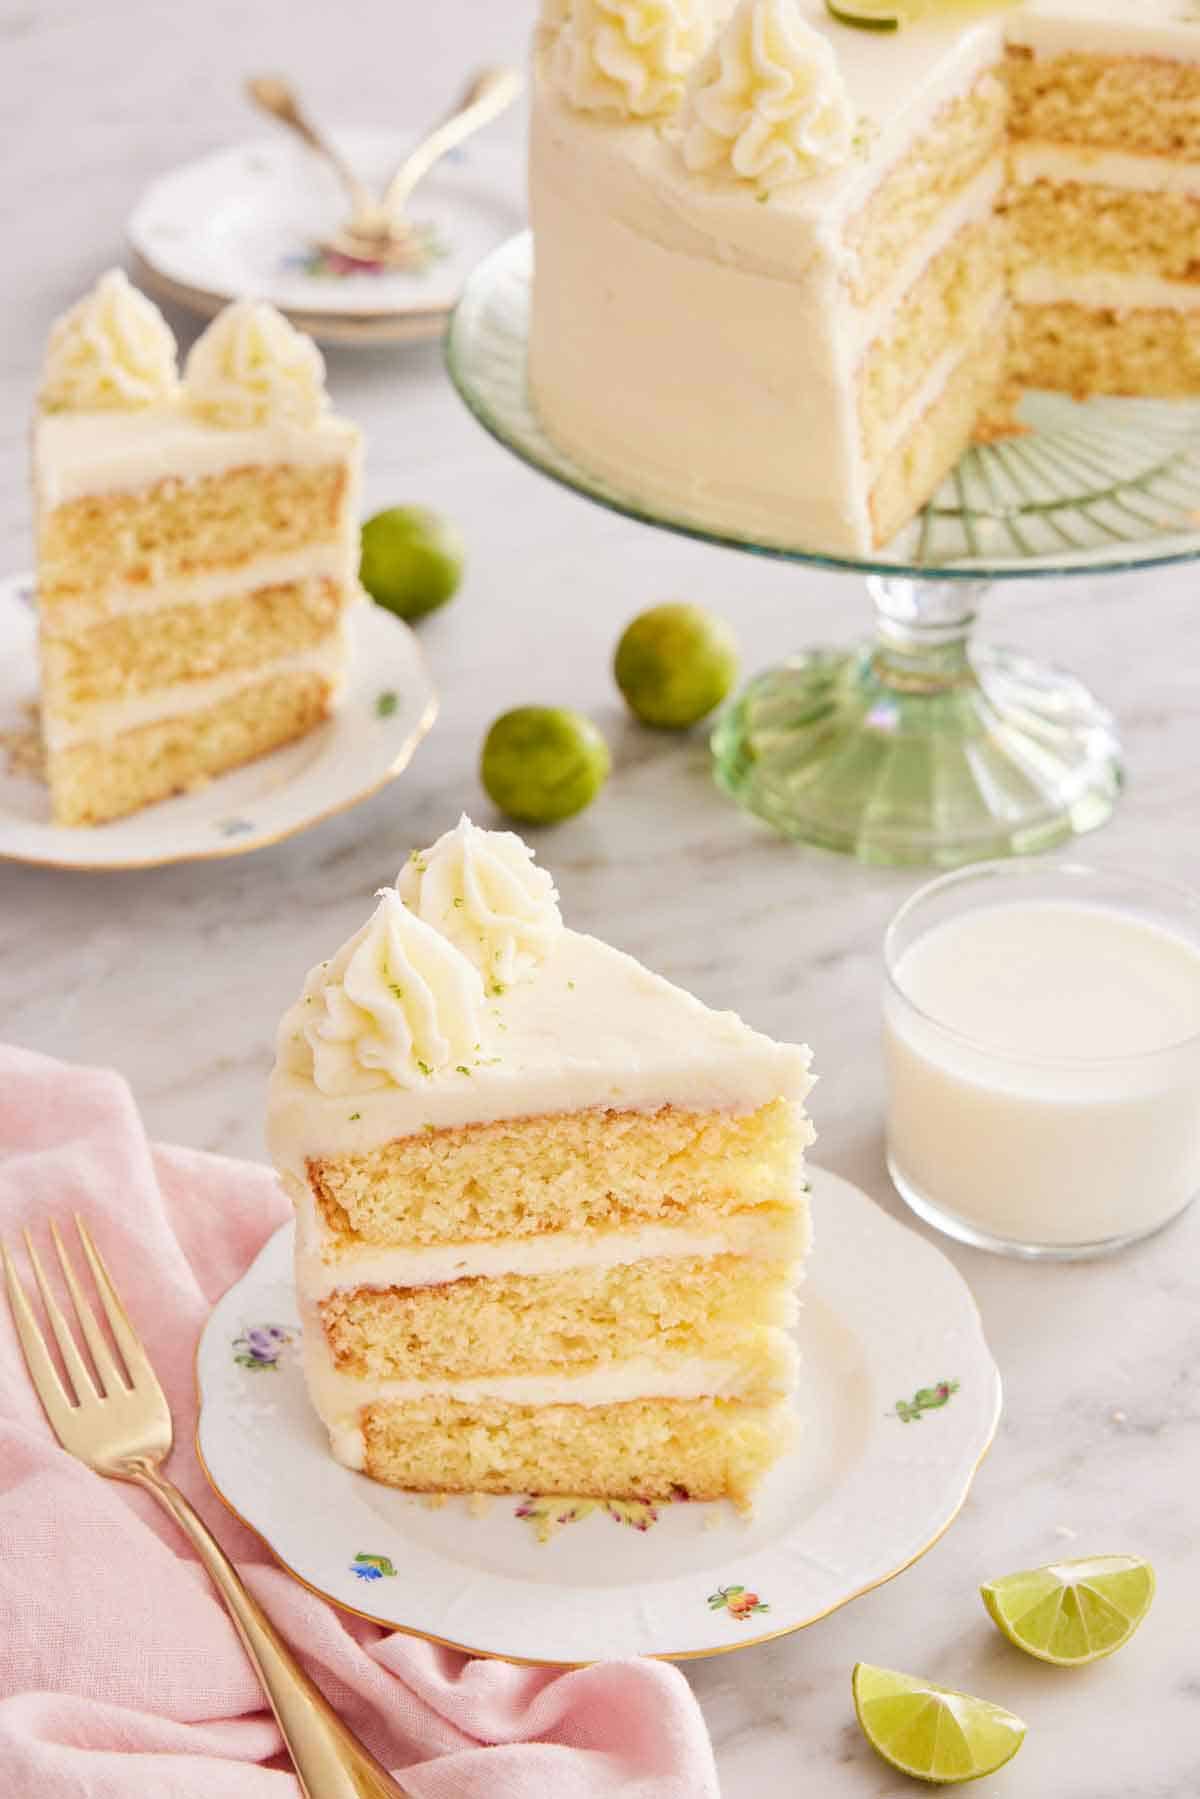 Two slices of key lime cake, plated, with a cake stand with the rest of the cut cake, a glass of milk, and cut limes in the background.